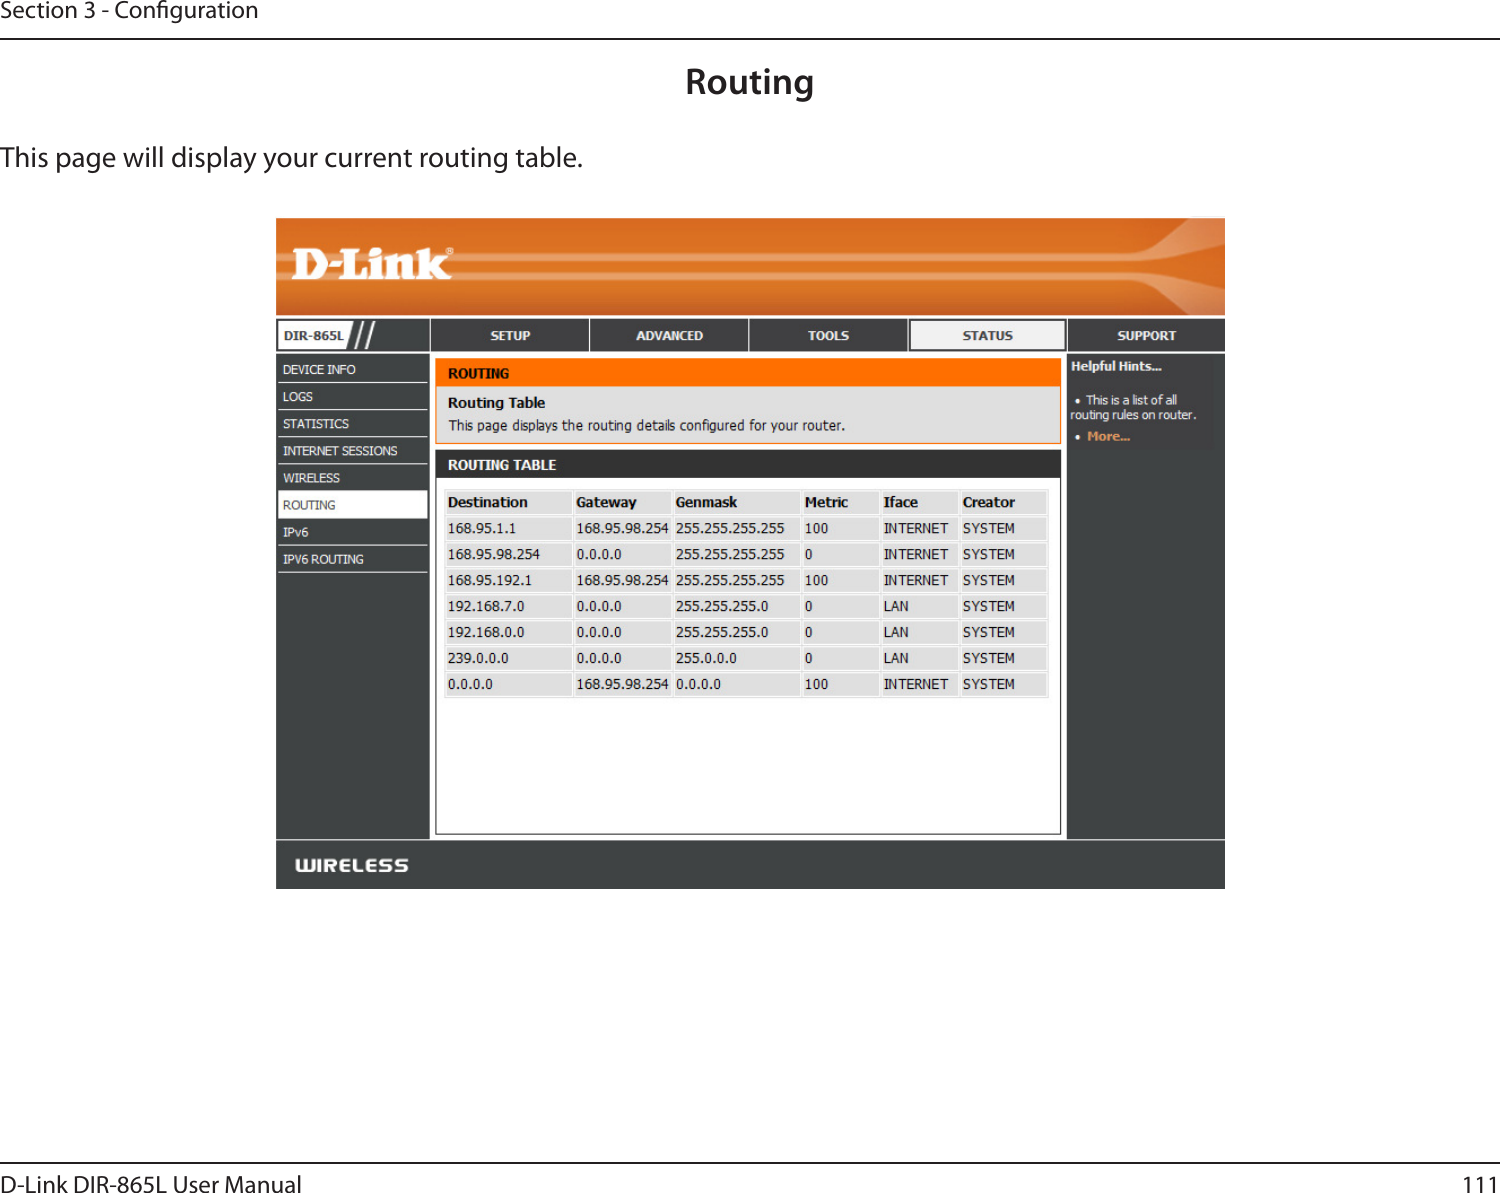 111D-Link DIR-865L User ManualSection 3 - CongurationRoutingThis page will display your current routing table.